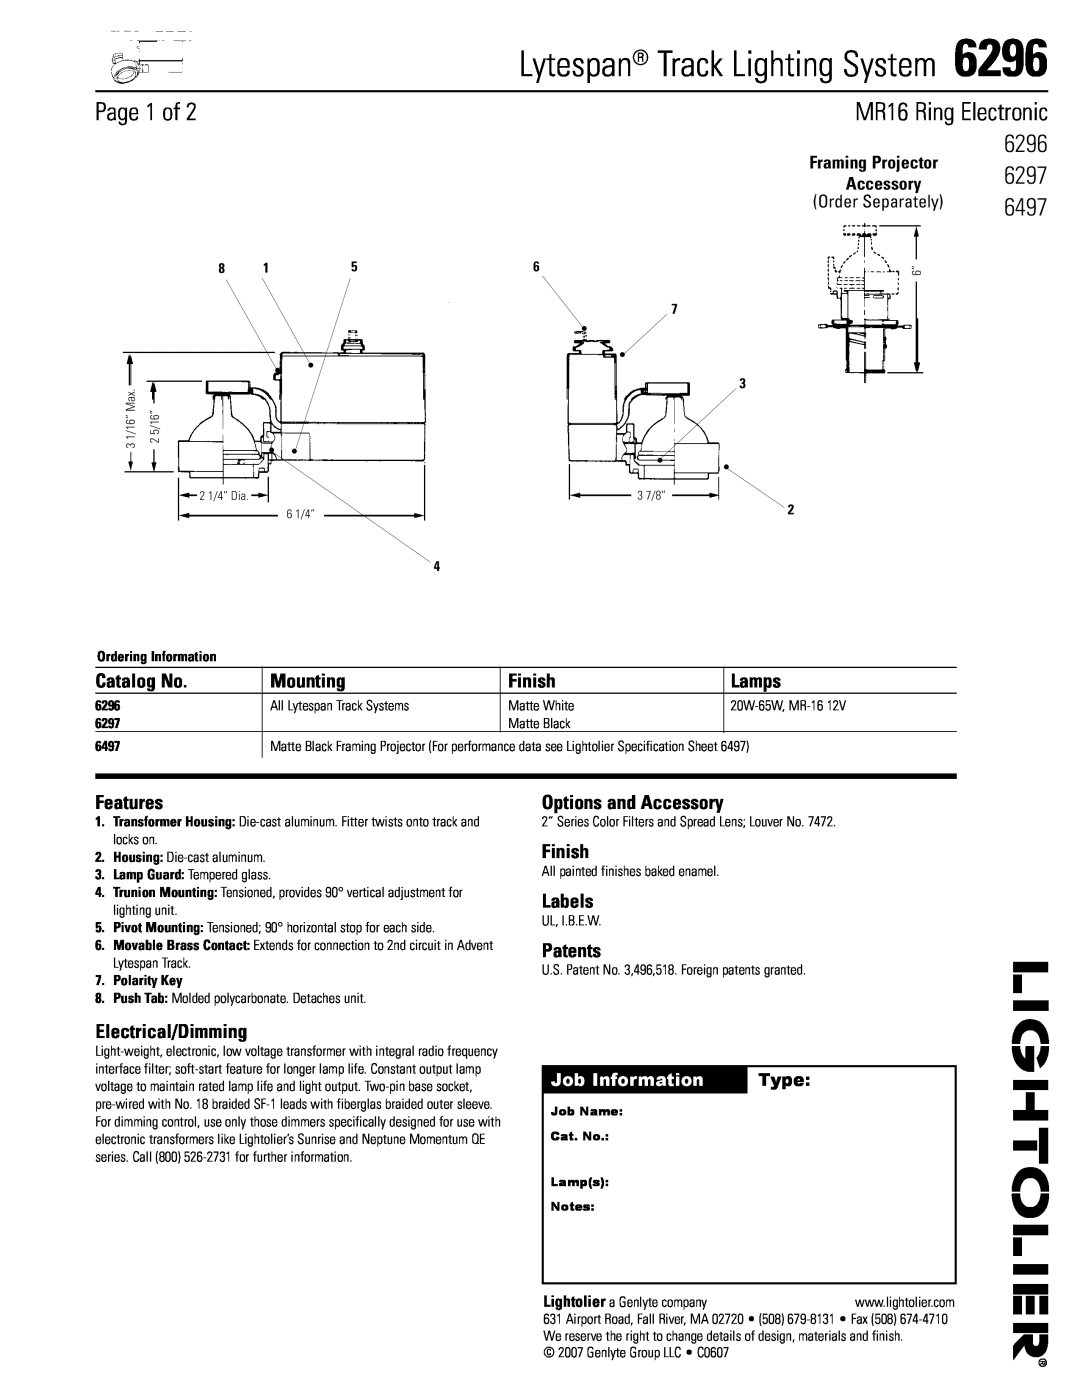 Lightolier 6296 specifications Page 1 of, 6297, 6497, Lytespan Track Lighting System, MR16 Ring Electronic, Catalog No 